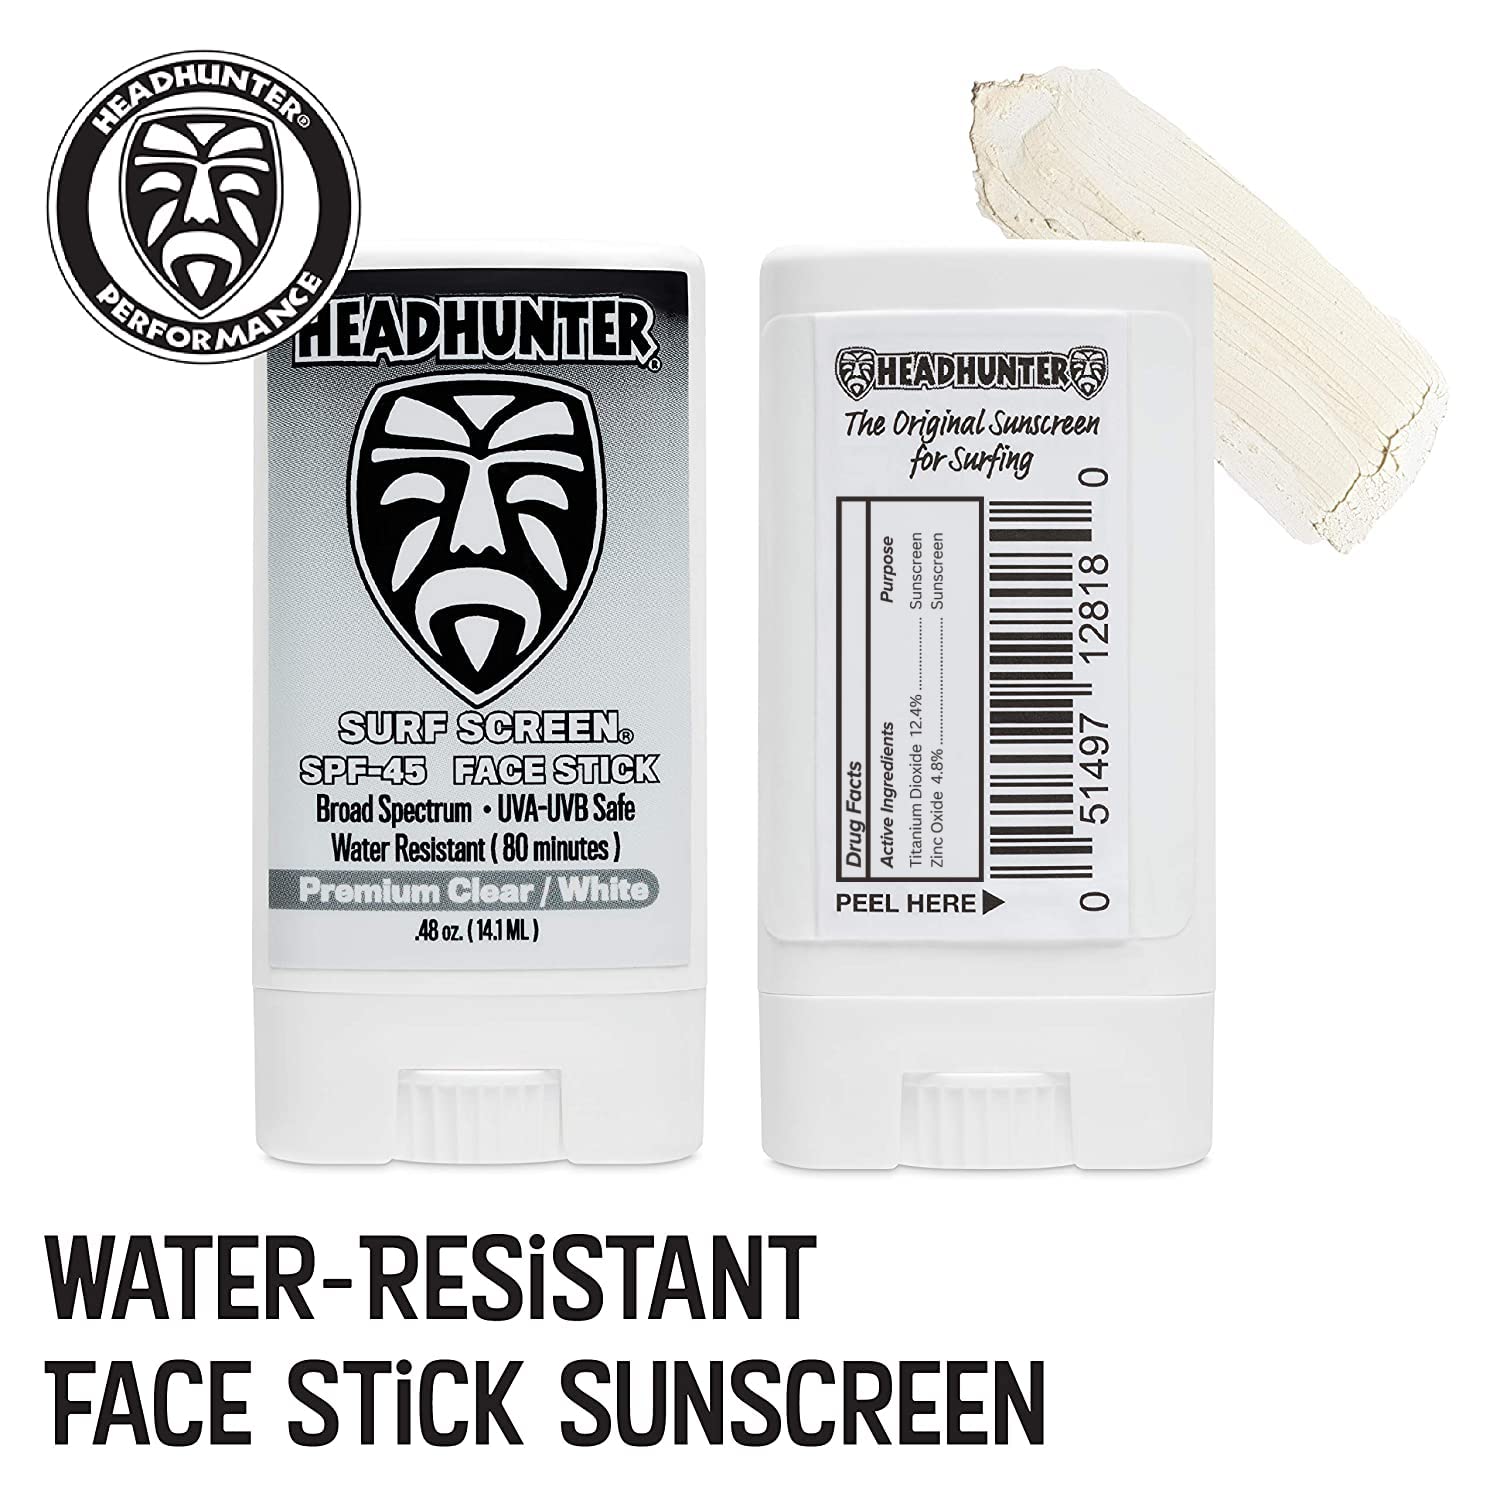 Headhunter Sunscreen Face Stick SPF 45 Waterproof Surf Sunblock for Waterman Water-Resistant Facial Sunscreen for Ultra-Sport Protection and Solar